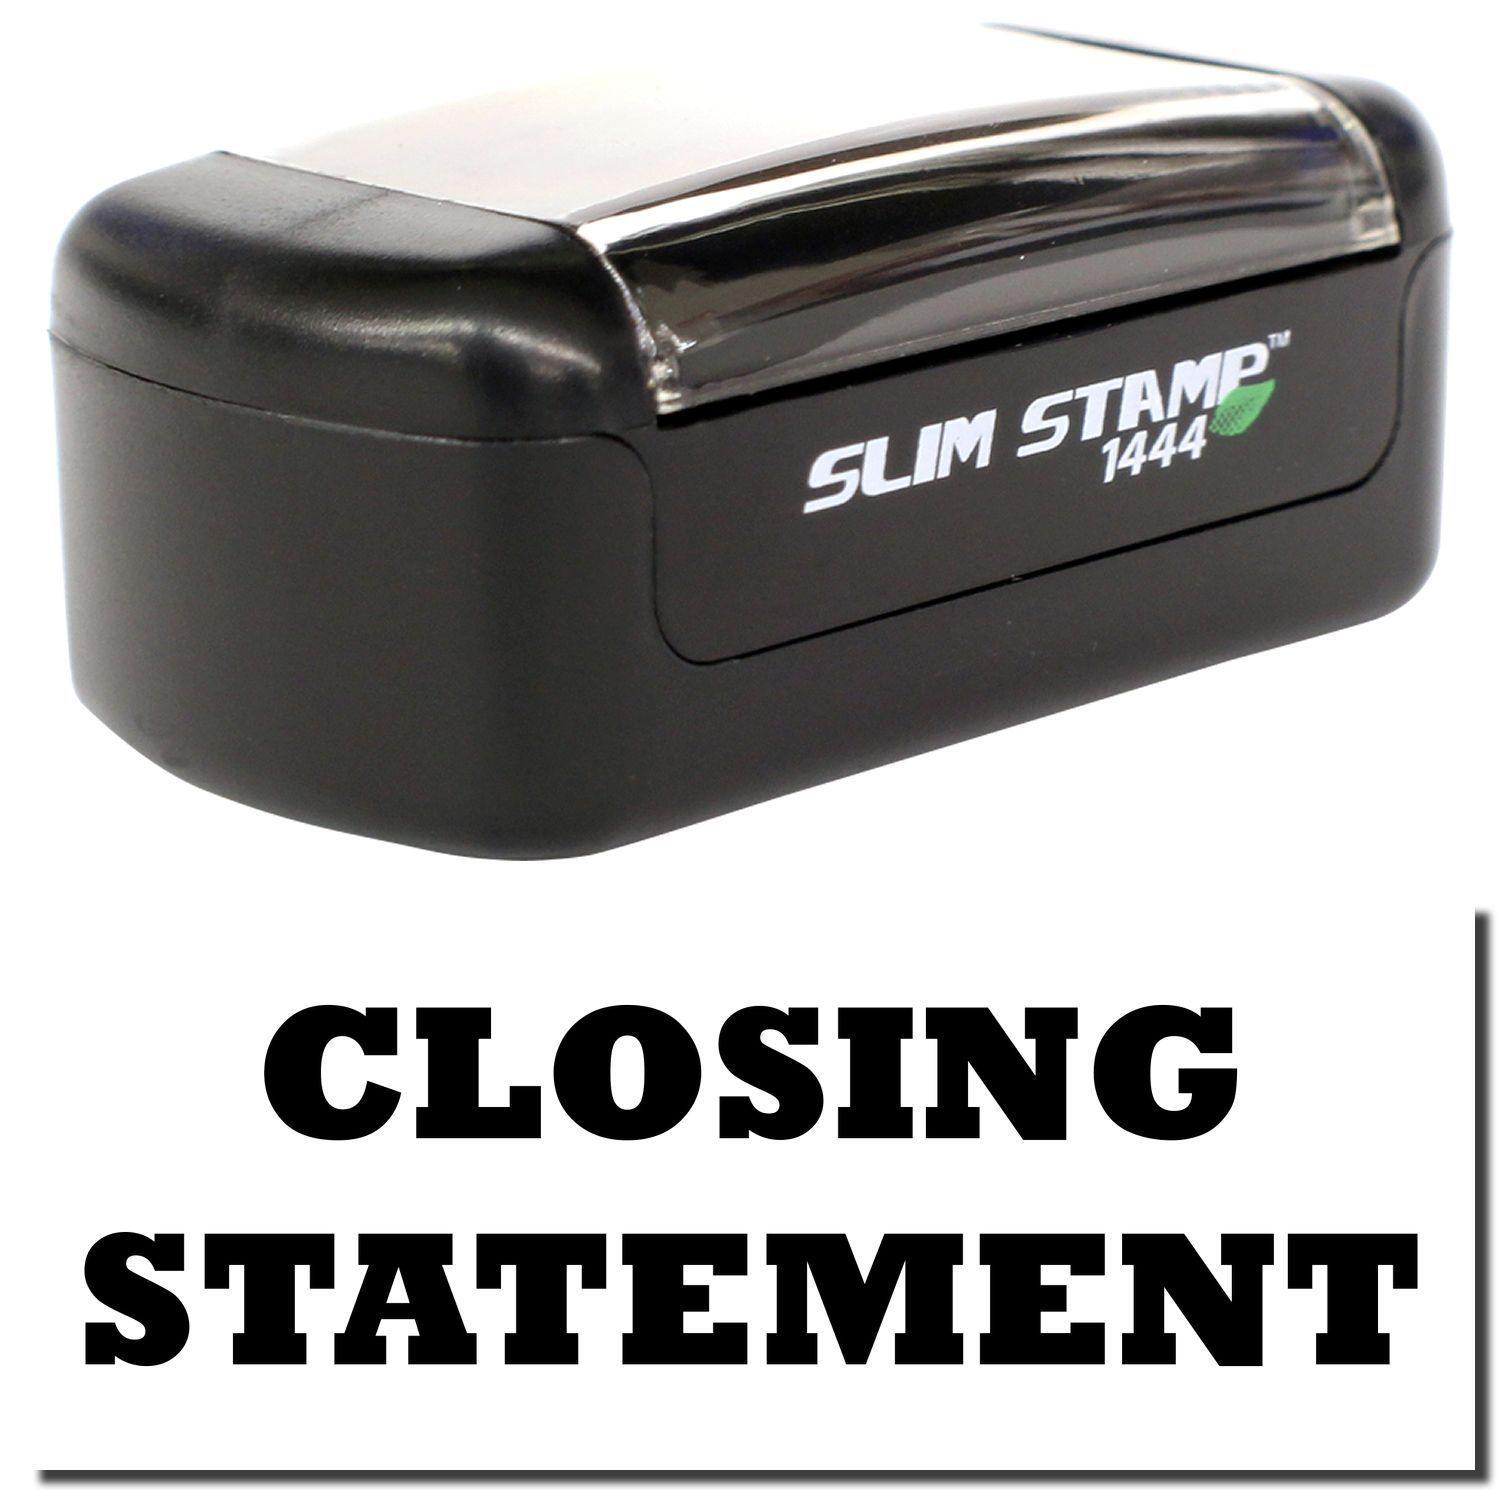 A stock office pre-inked stamp with a stamped image showing how the text "CLOSING STATEMENT" is displayed after stamping.